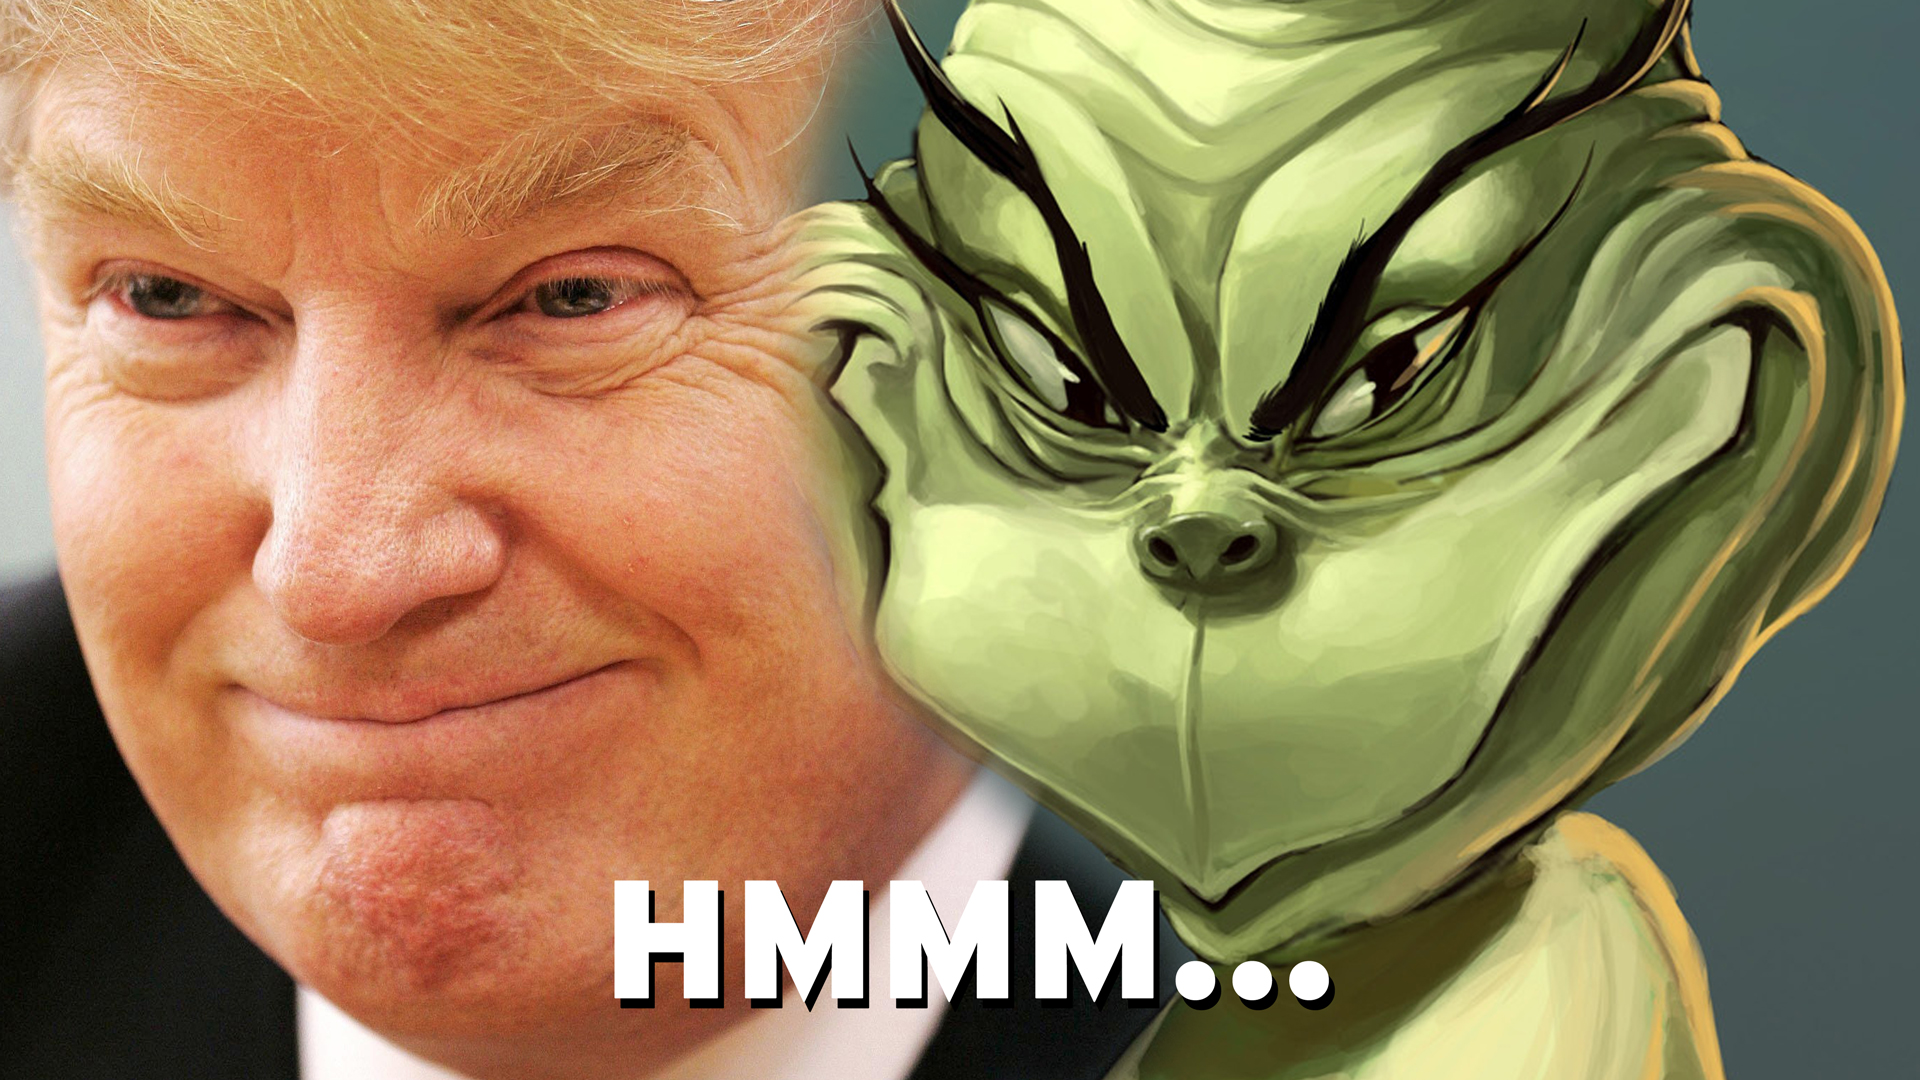 Trump and the Grinch